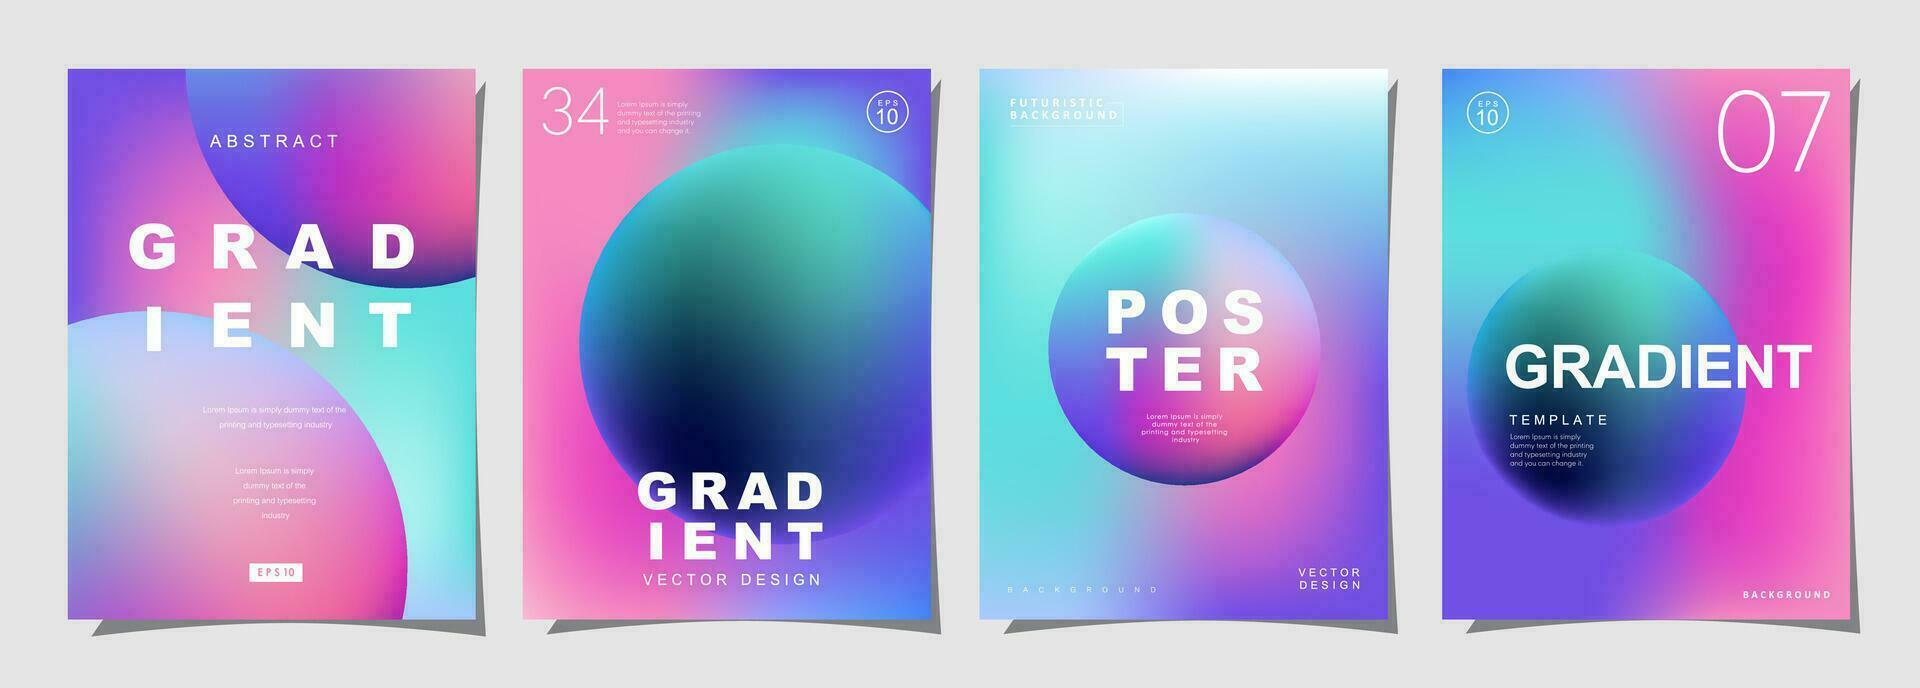 Set of creative covers or posters concept in modern minimal style for corporate identity, branding, social media advertising, promo. Circle design template with dynamic fluid gradient. vector